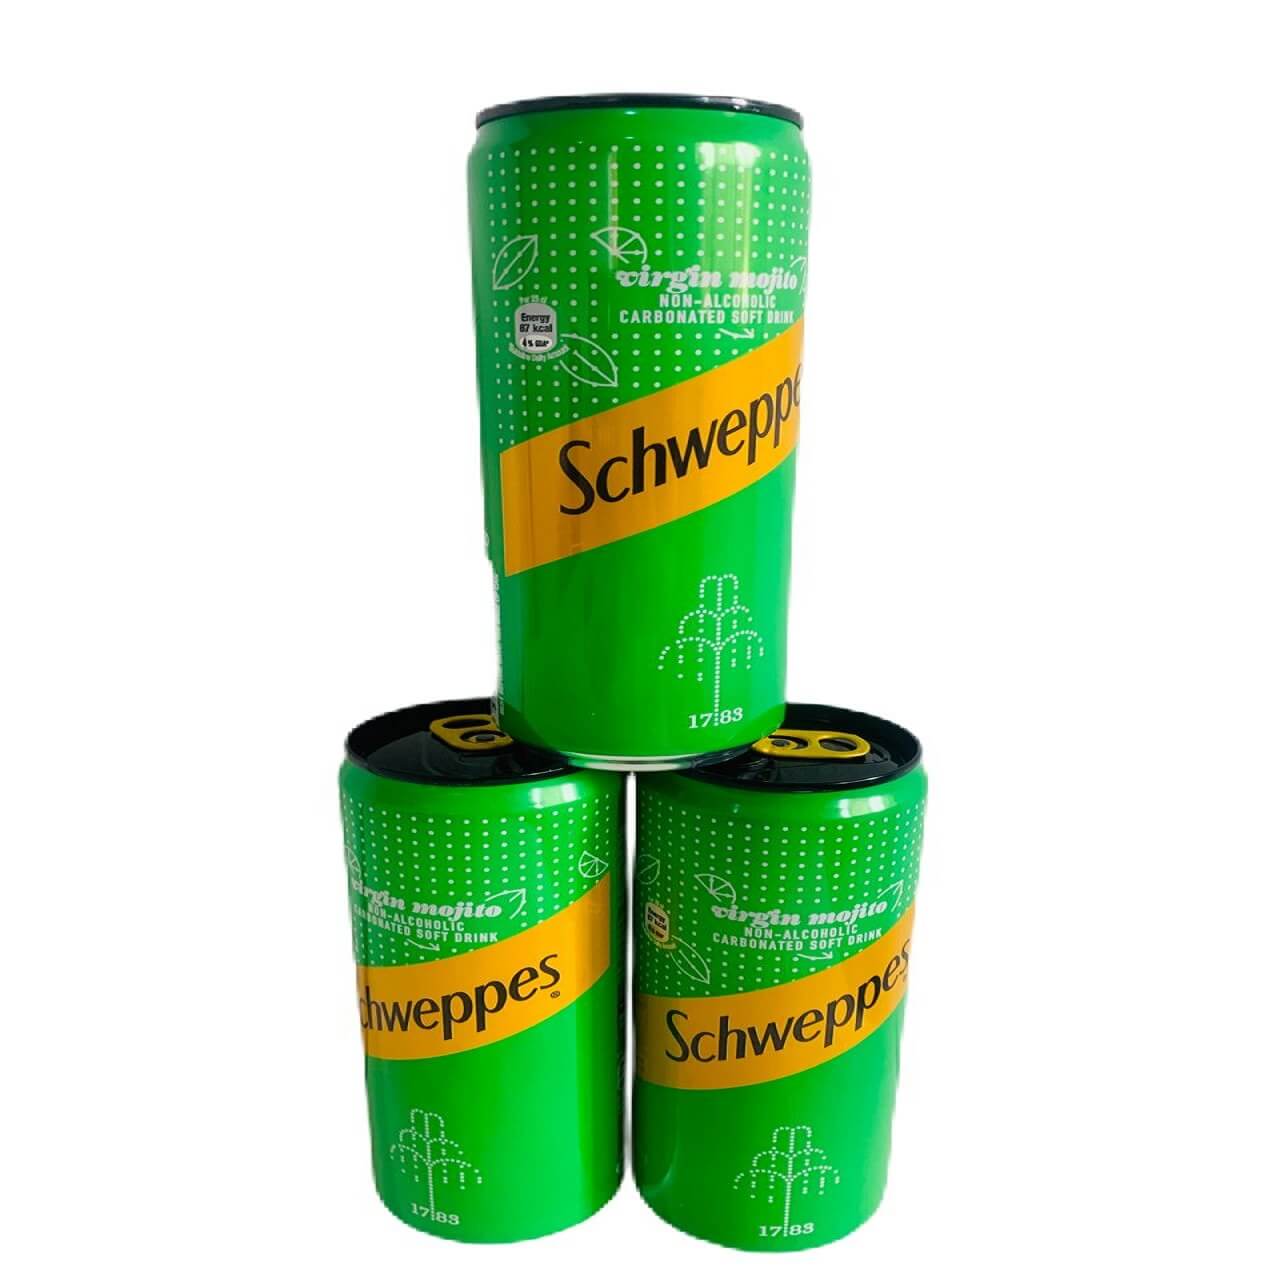 3 cans of schweppes mojito